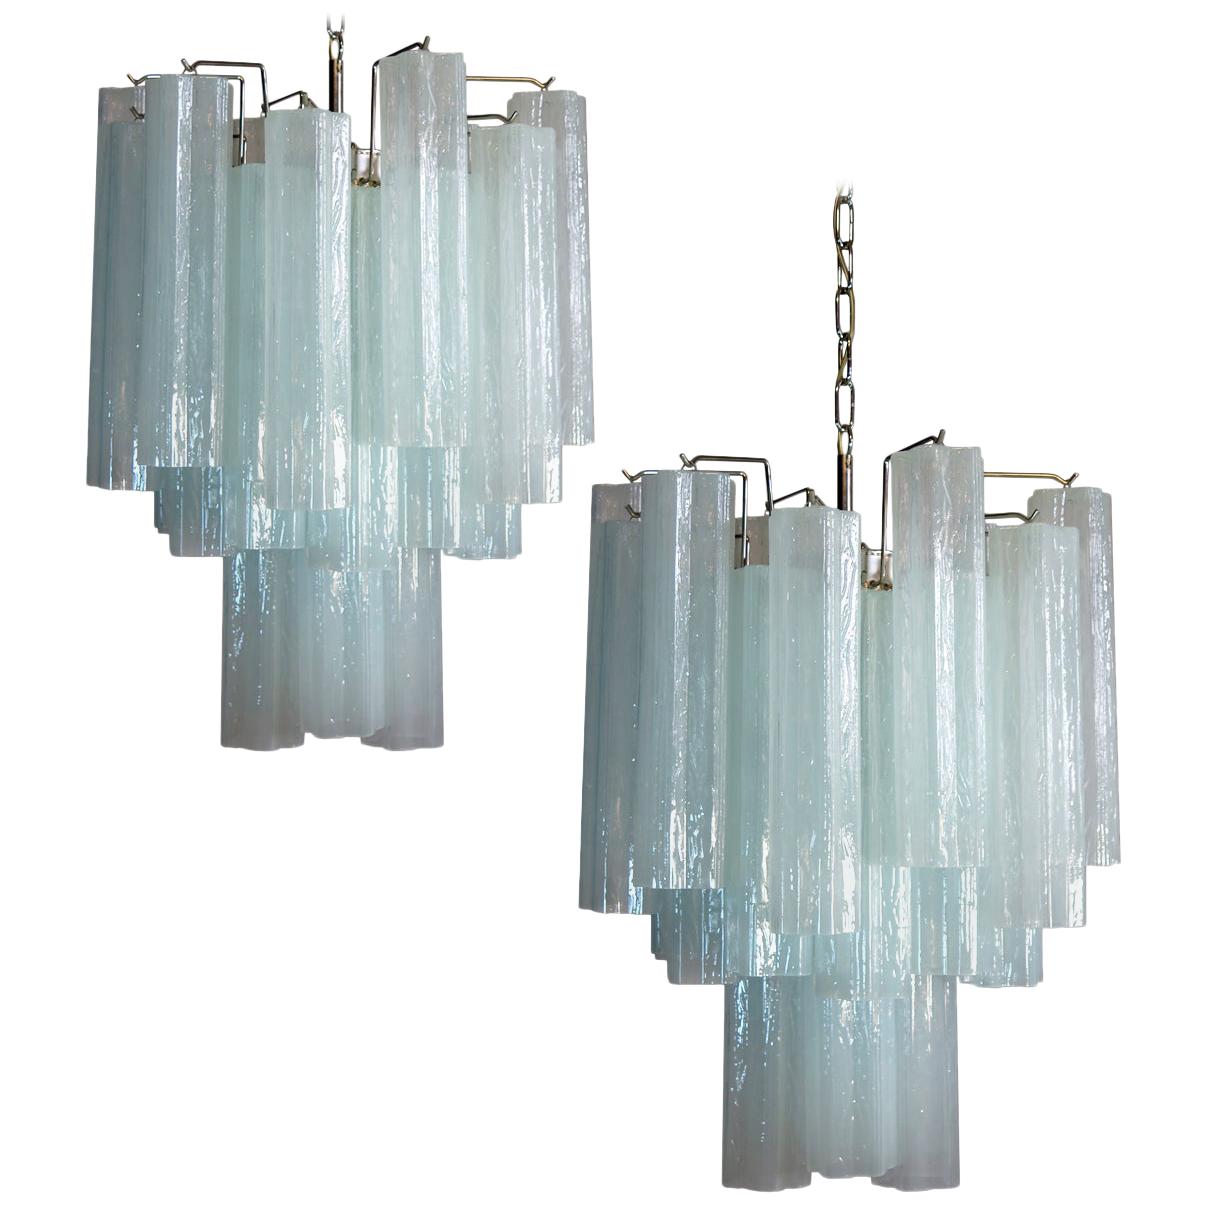 Pair of 30 Tronchi Chandeliers in Toni Zuccheri Style for Venini, Murano For Sale